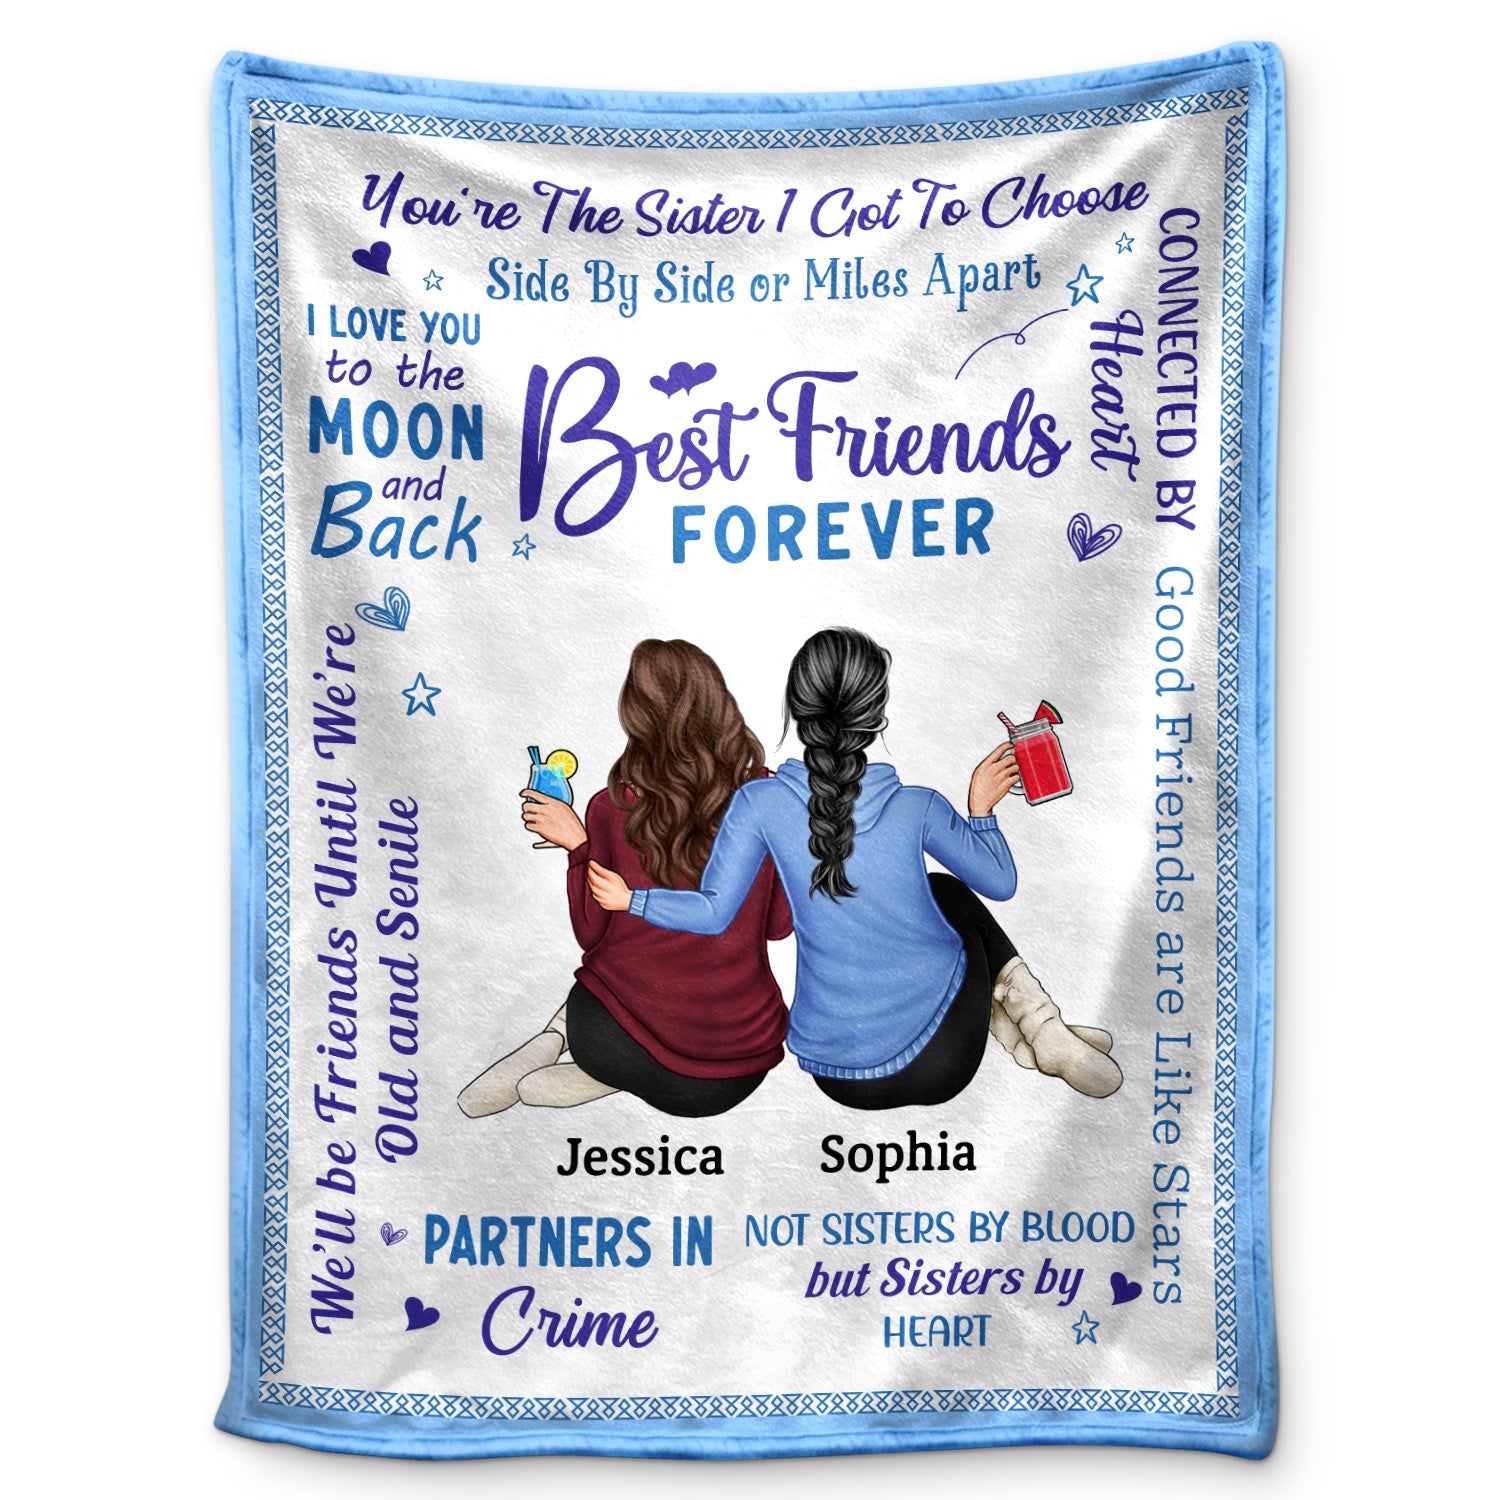 Best Friends Forever Connected By Heart - Loving Gifts For Besties - Personalized Fleece Blanket